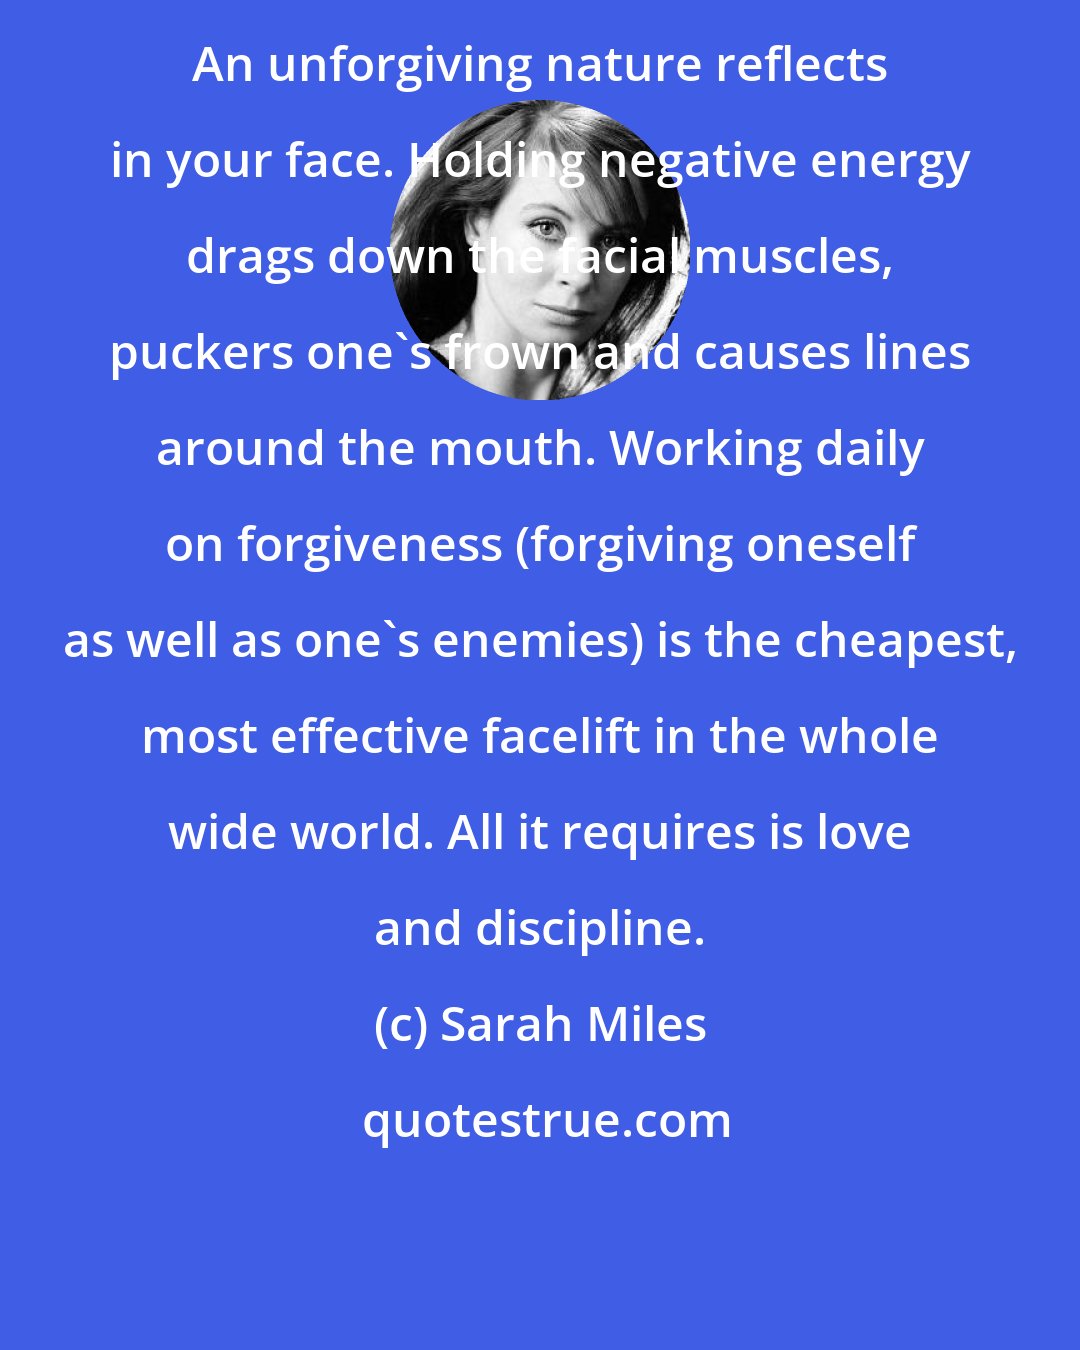 Sarah Miles: An unforgiving nature reflects in your face. Holding negative energy drags down the facial muscles, puckers one's frown and causes lines around the mouth. Working daily on forgiveness (forgiving oneself as well as one's enemies) is the cheapest, most effective facelift in the whole wide world. All it requires is love and discipline.